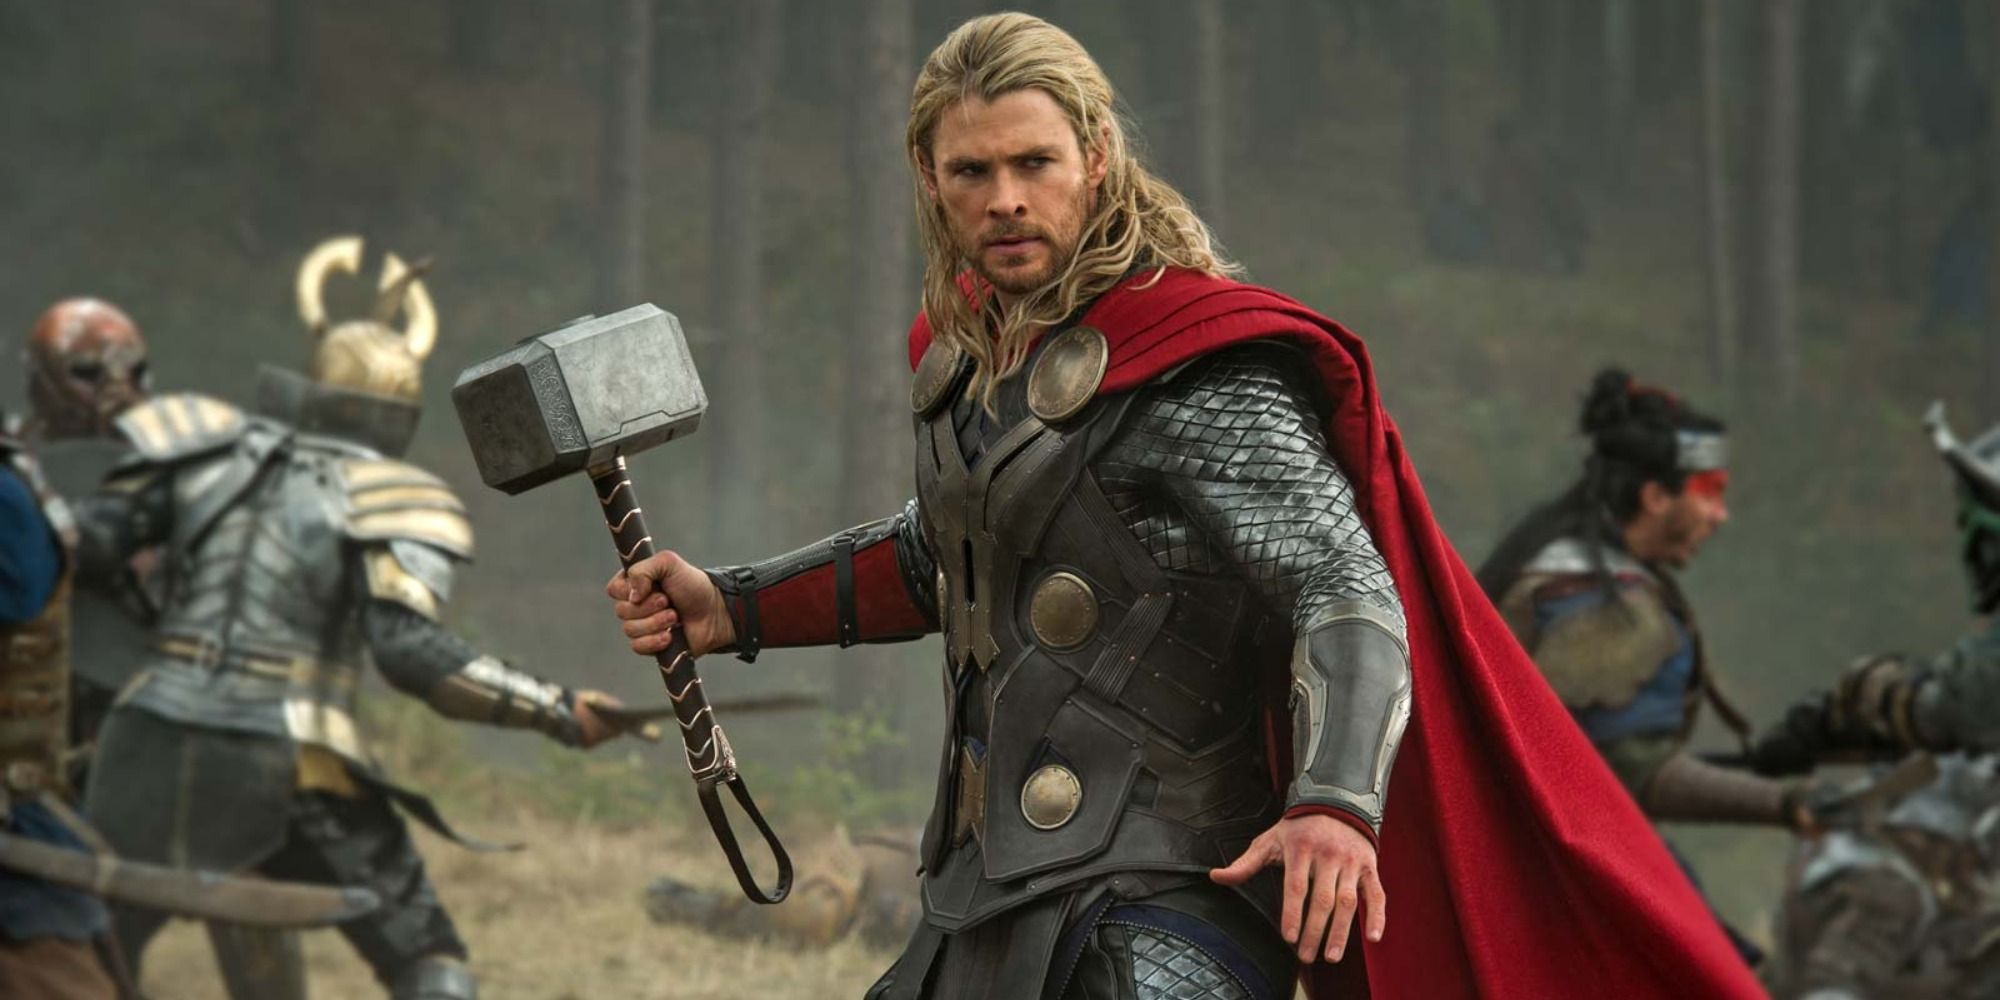 An image of Thor wielding his hammer in battle in Thor 2